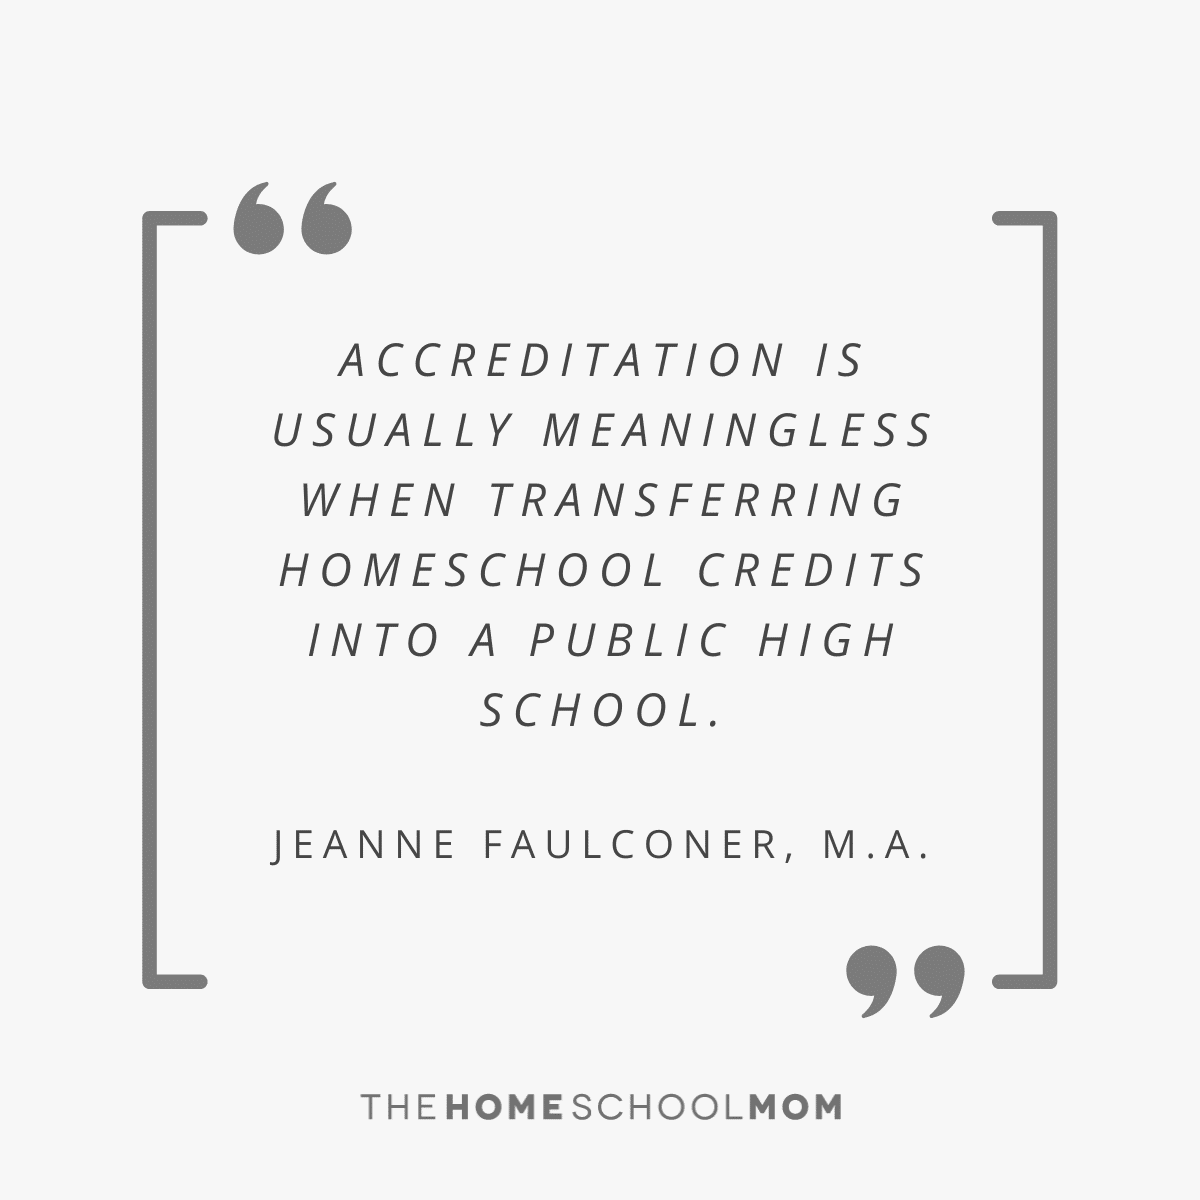 Accreditation is usually meaningless when transferring homeschool credits into a public high school - Jeanne Faulconer, M.A.